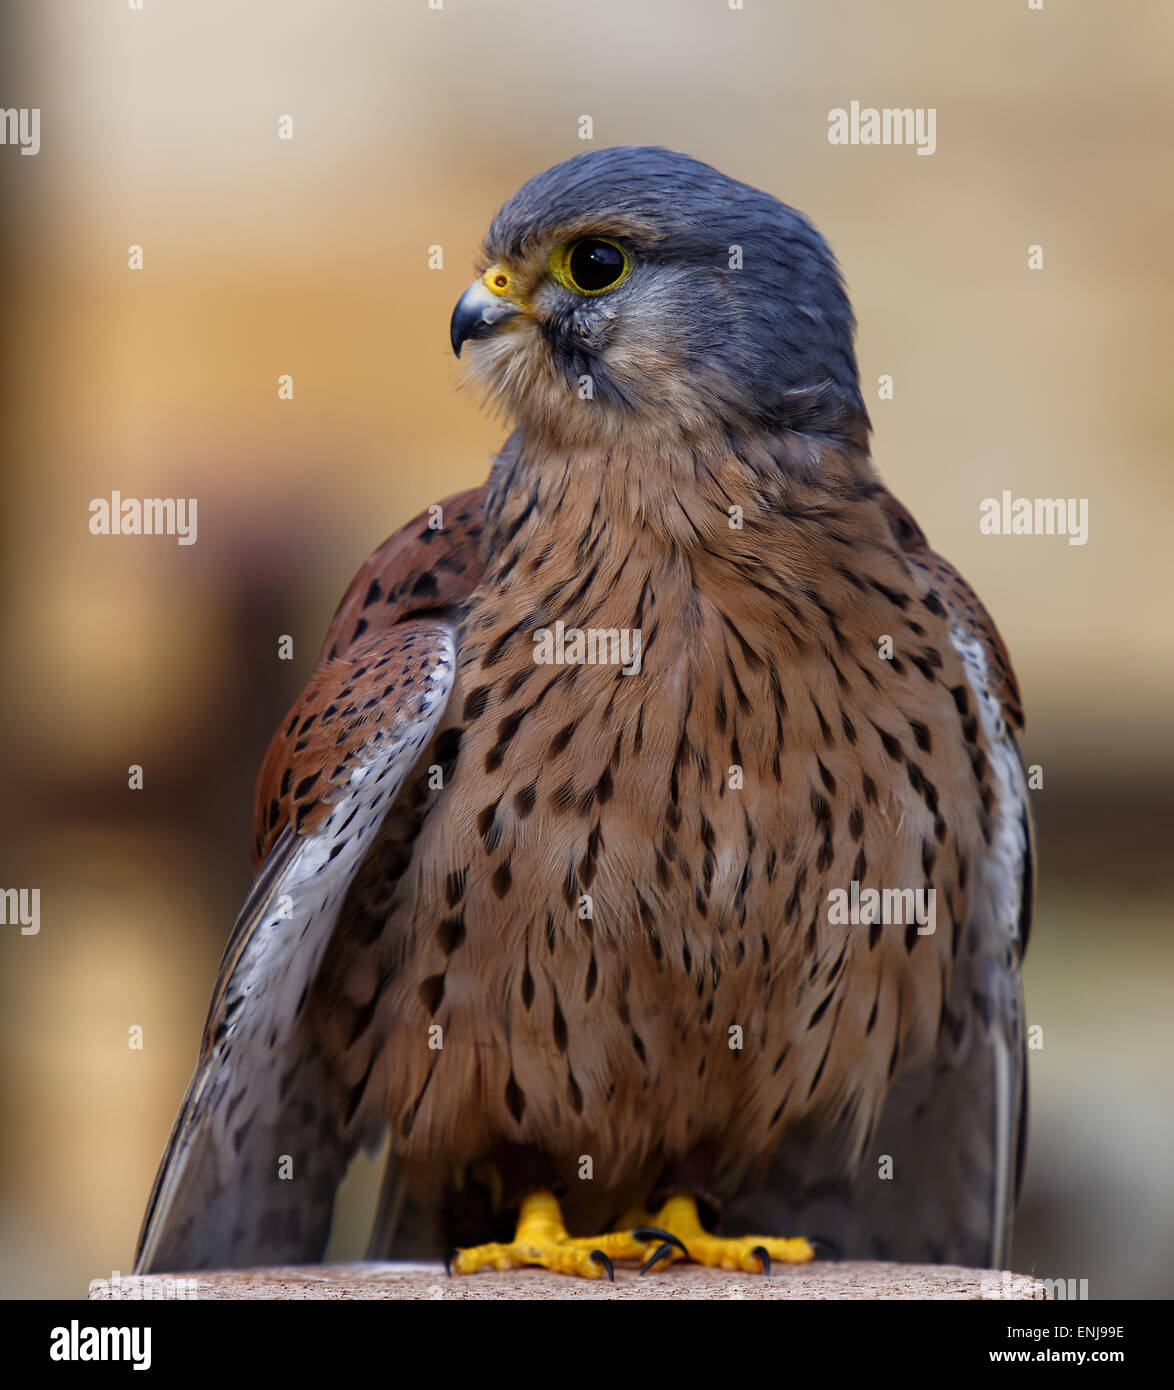 Common Kestrel Perched on log Stock Photo